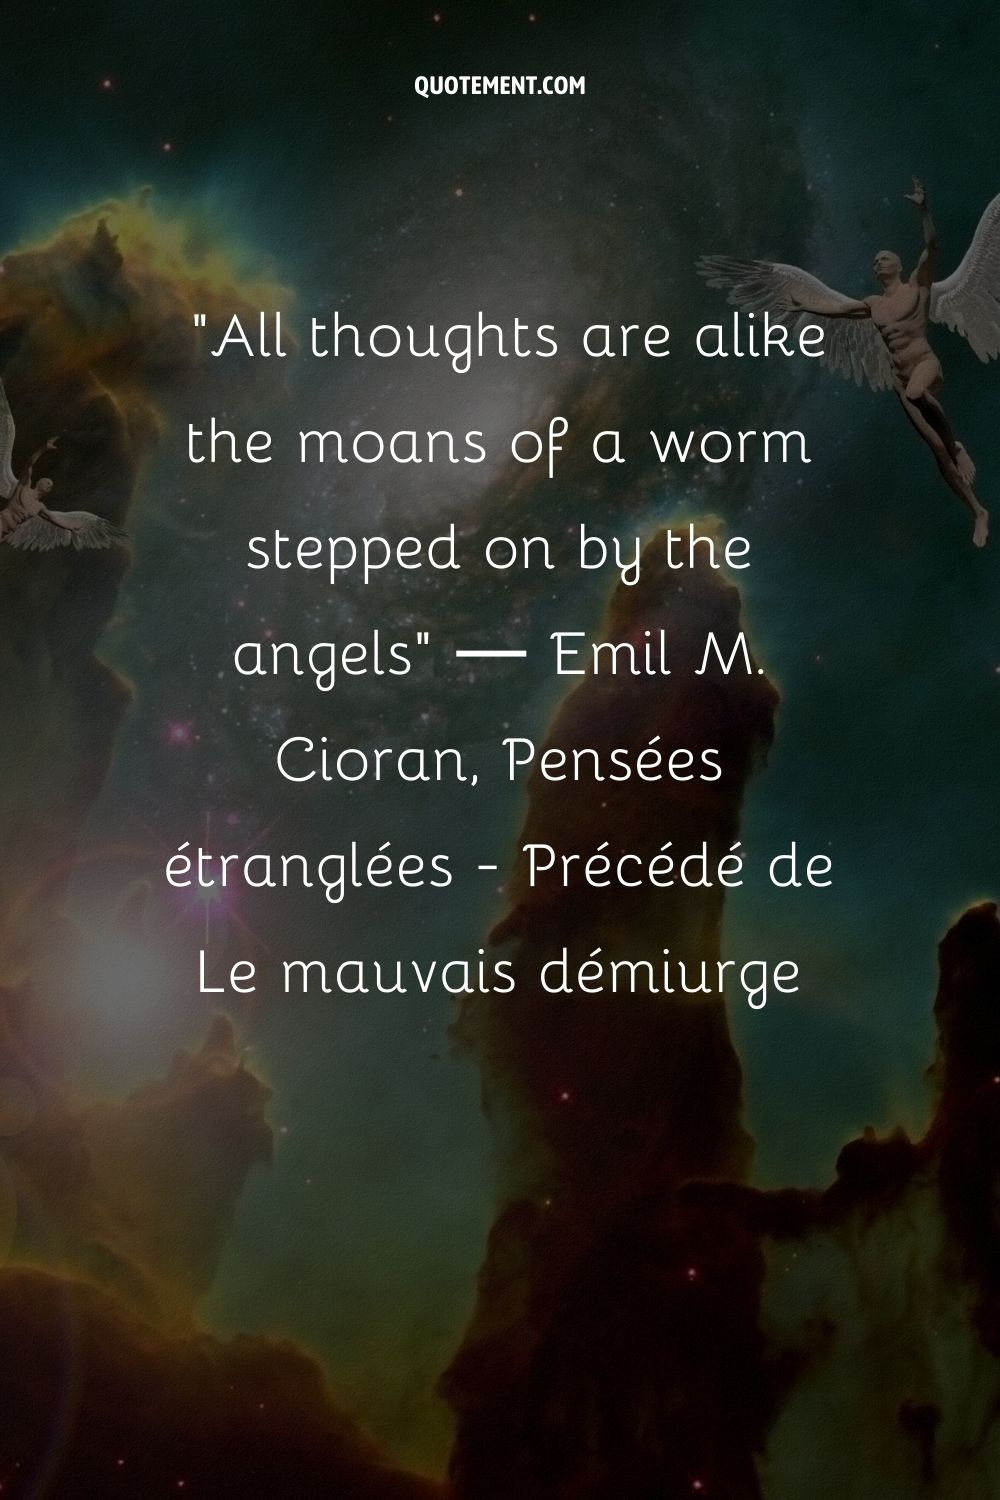 All thoughts are alike the moans of a worm stepped on by the angels